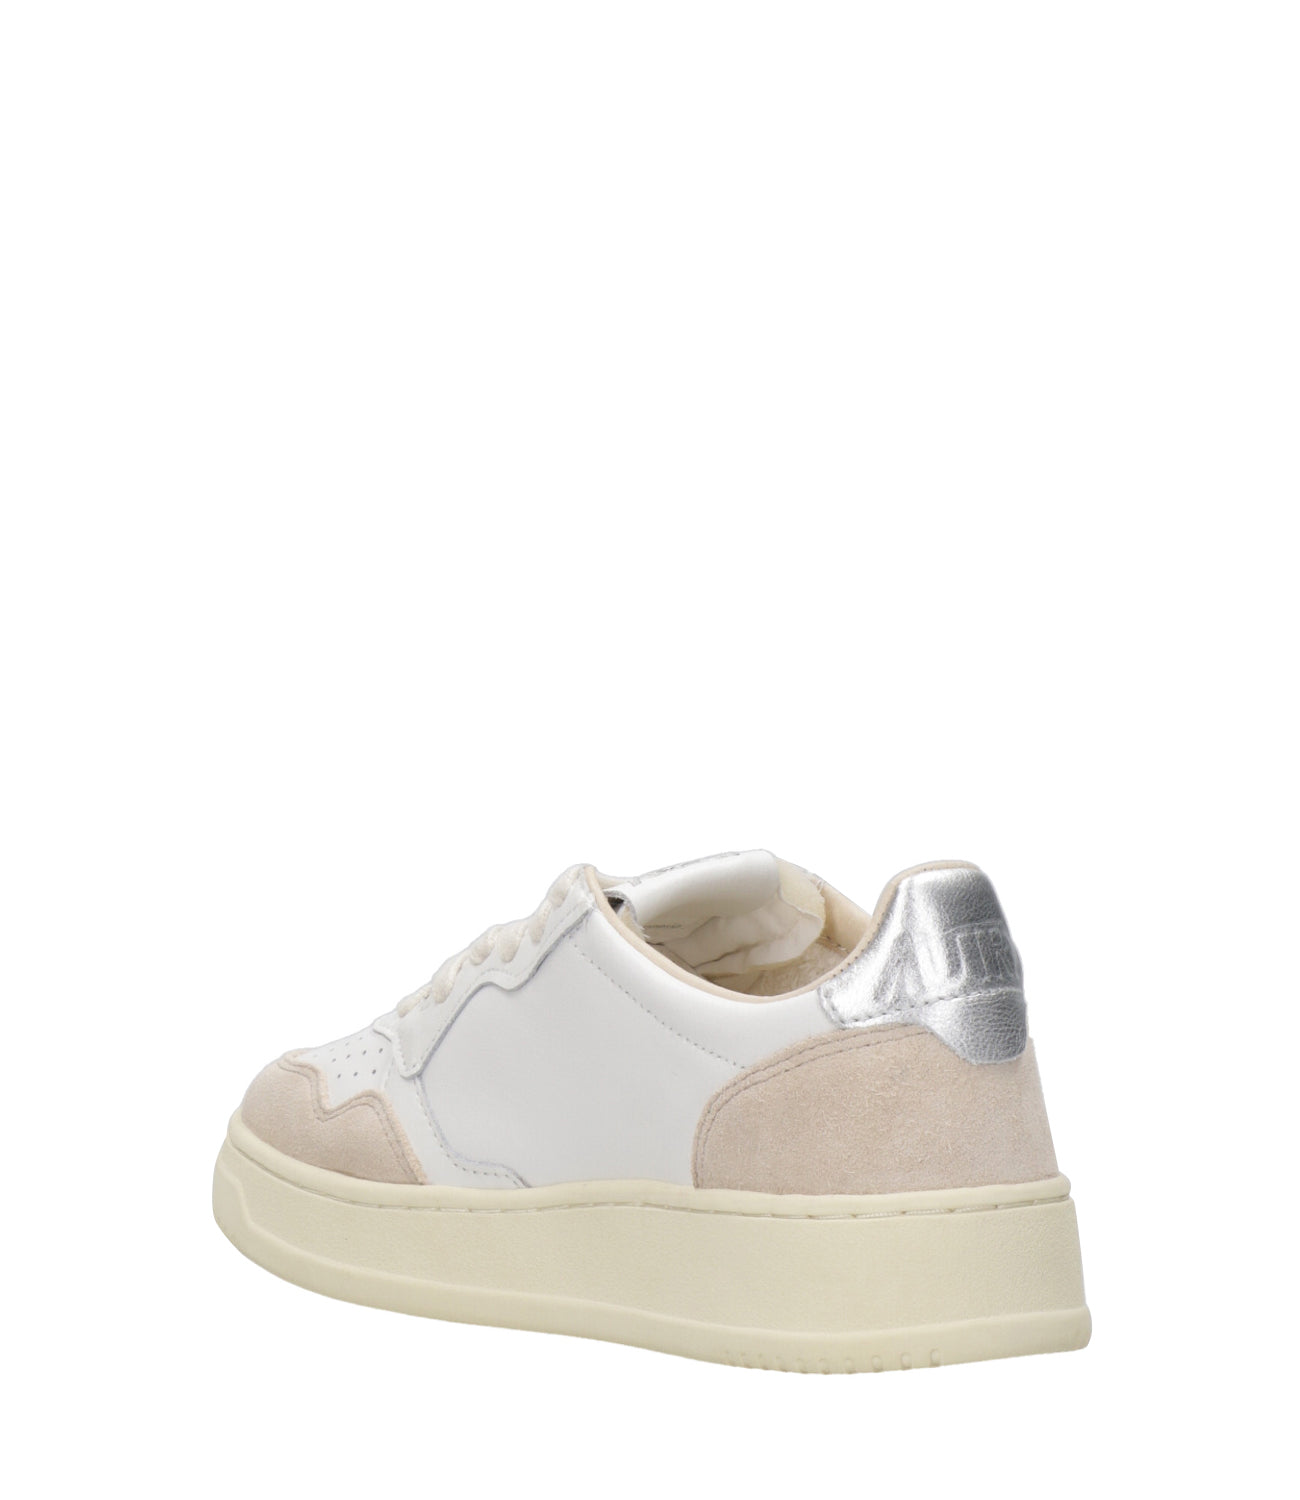 Autry | Medalist Low White and Silver Sneakers